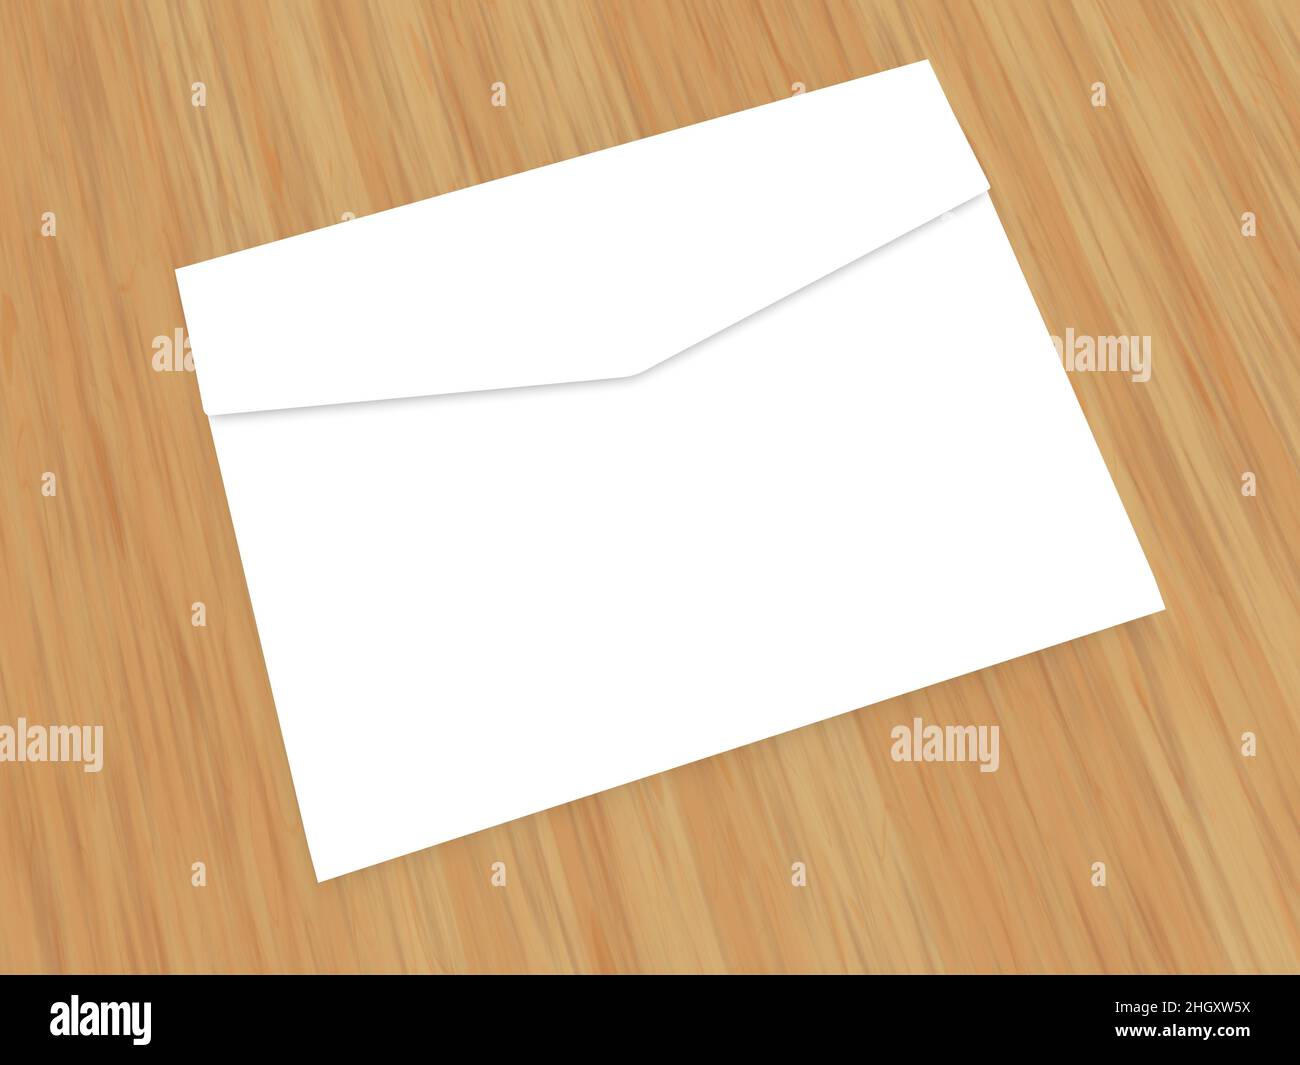 White paper envelope for letters on a wooden table. 3d render illustration. Stock Photo